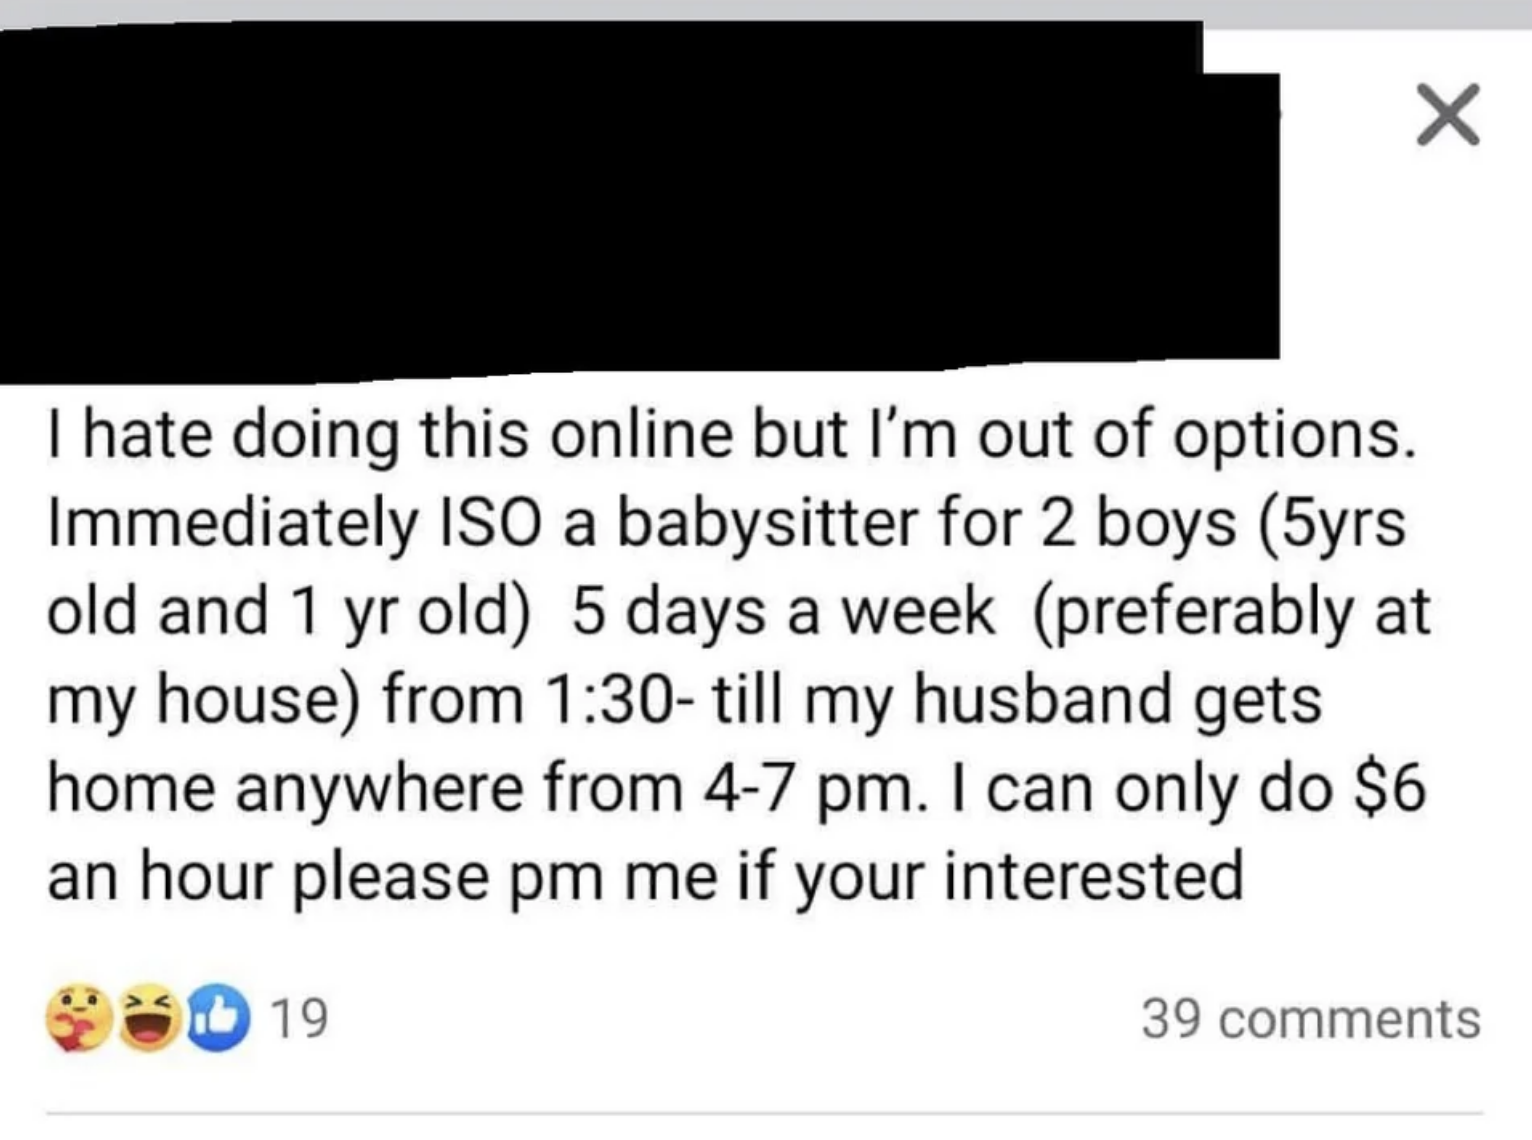 &quot;I can only do $6 an hour please pm me if your interested&quot;